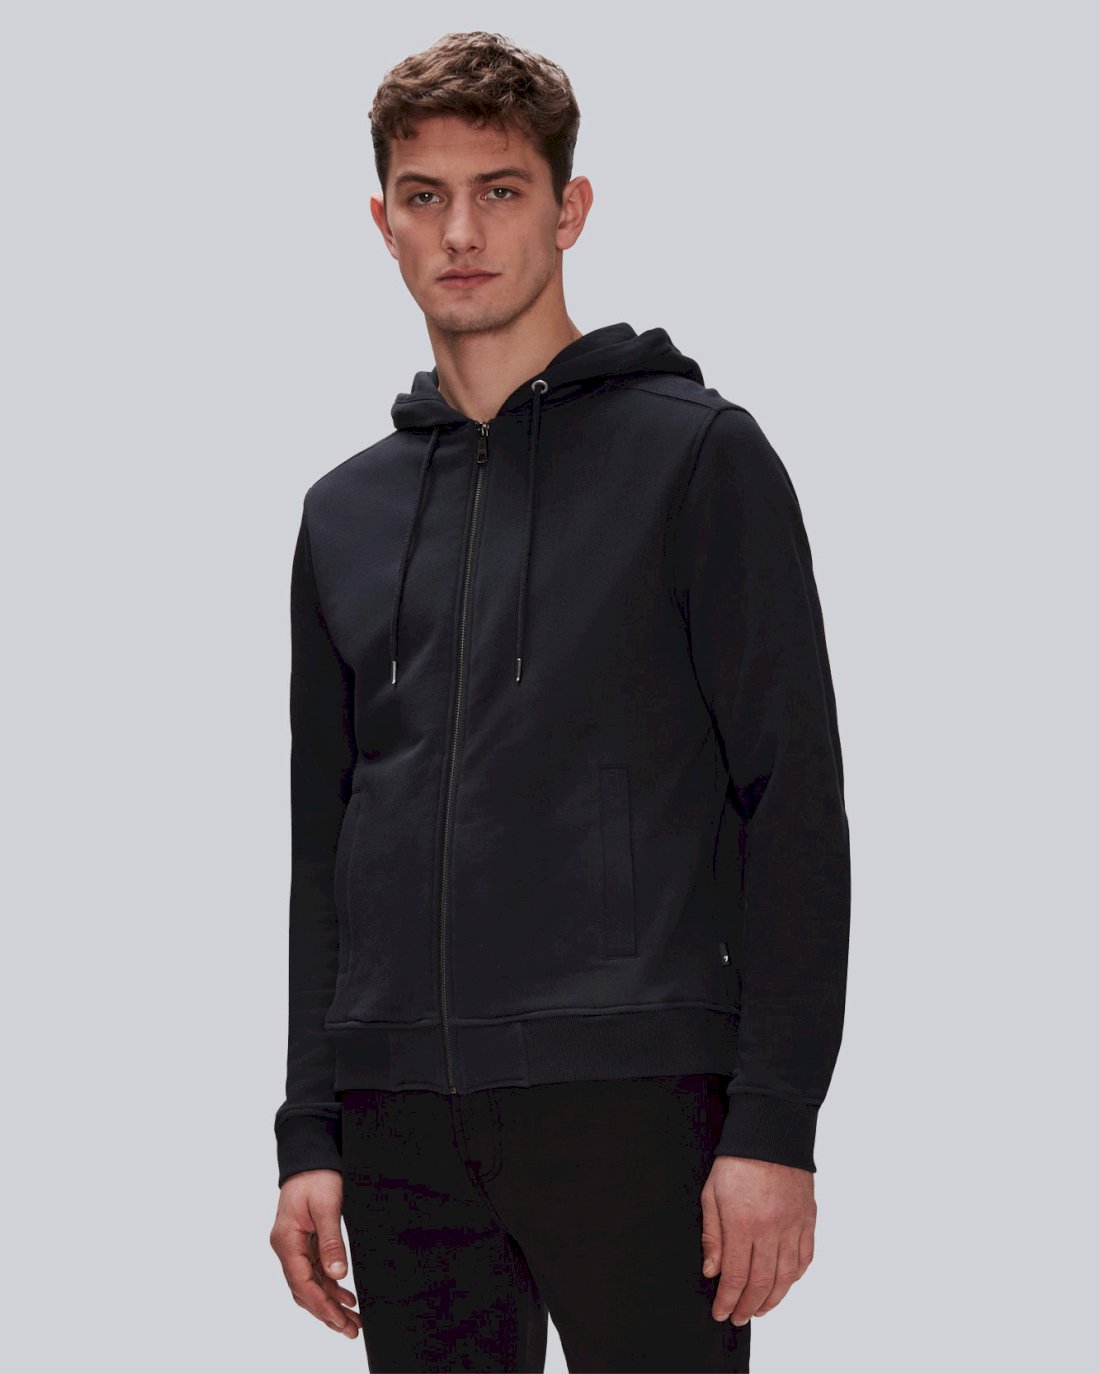 Basic, zip-up hoodie in faded black with two pockets and a